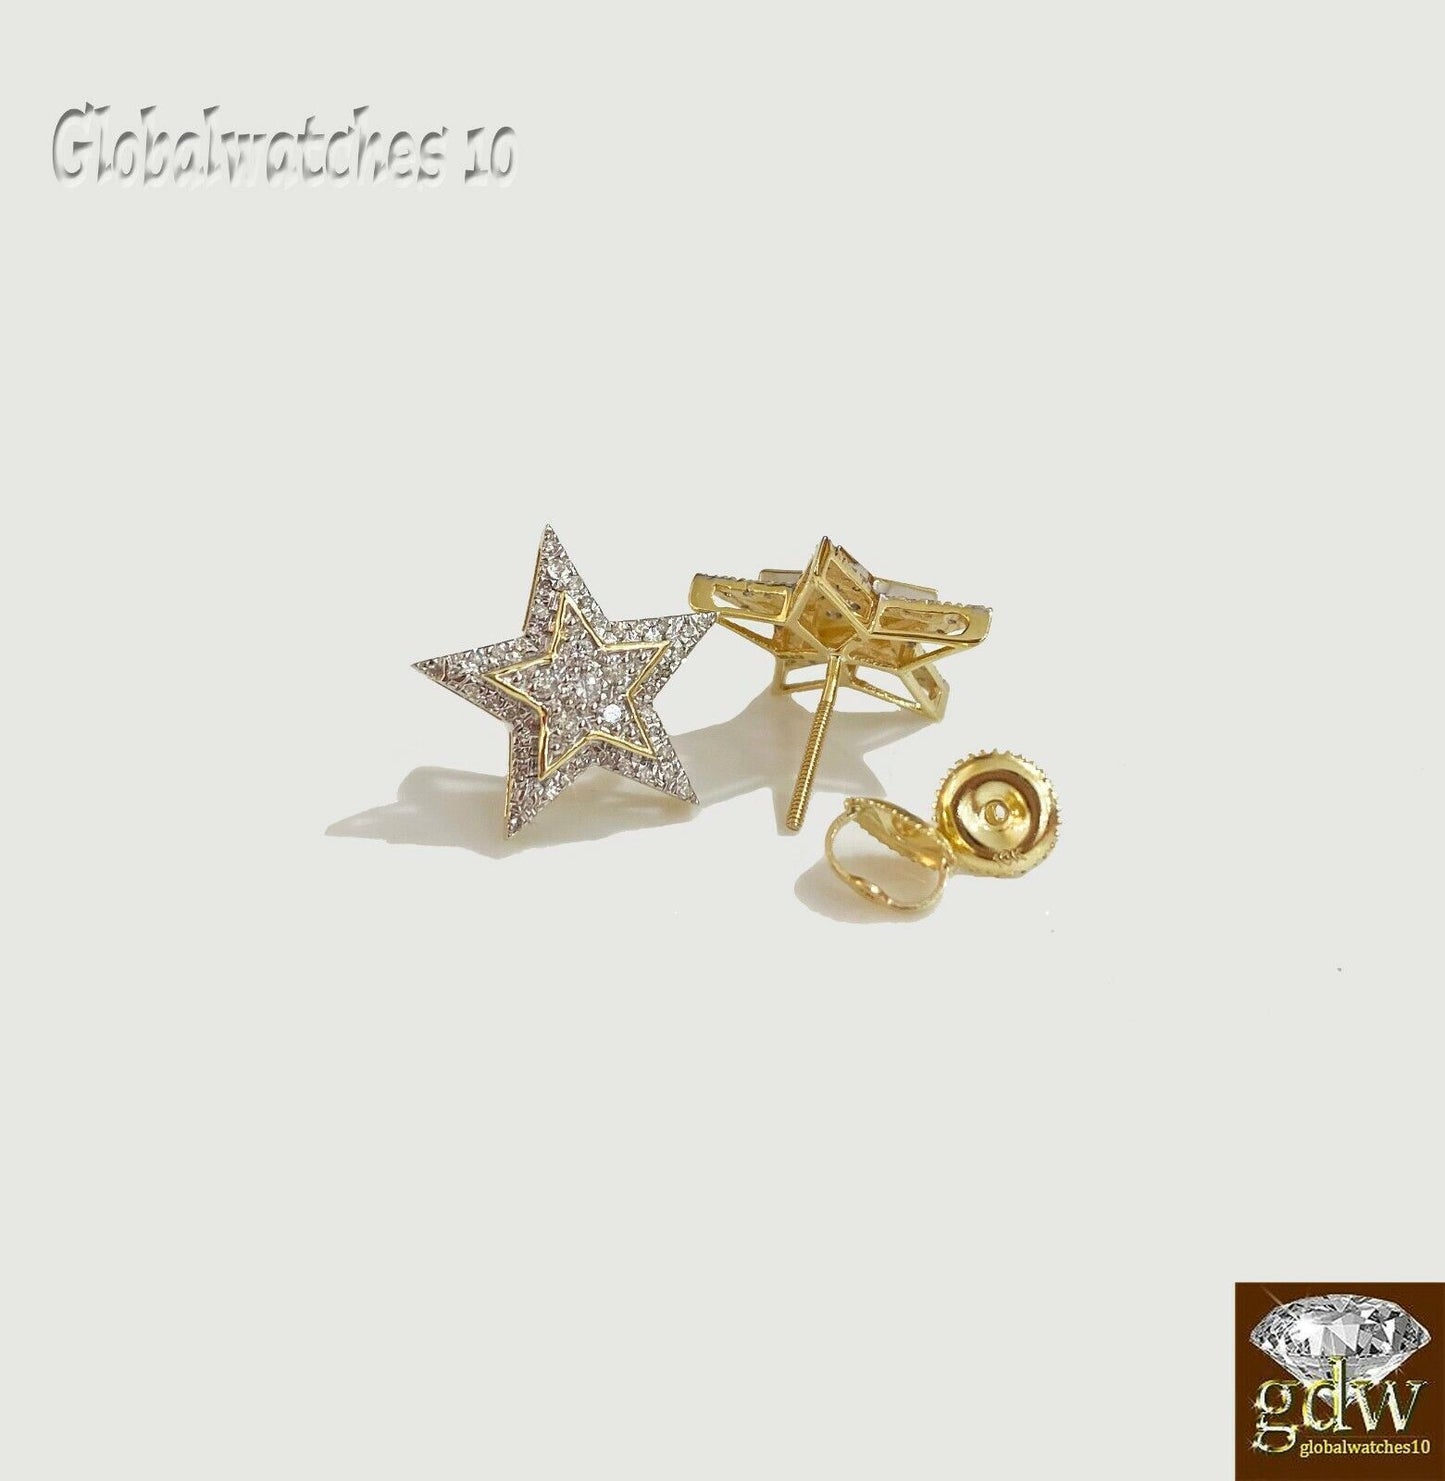 10k Gold Mens Diamond Ring and Earring Set Star Shaped Ring and Earring Real